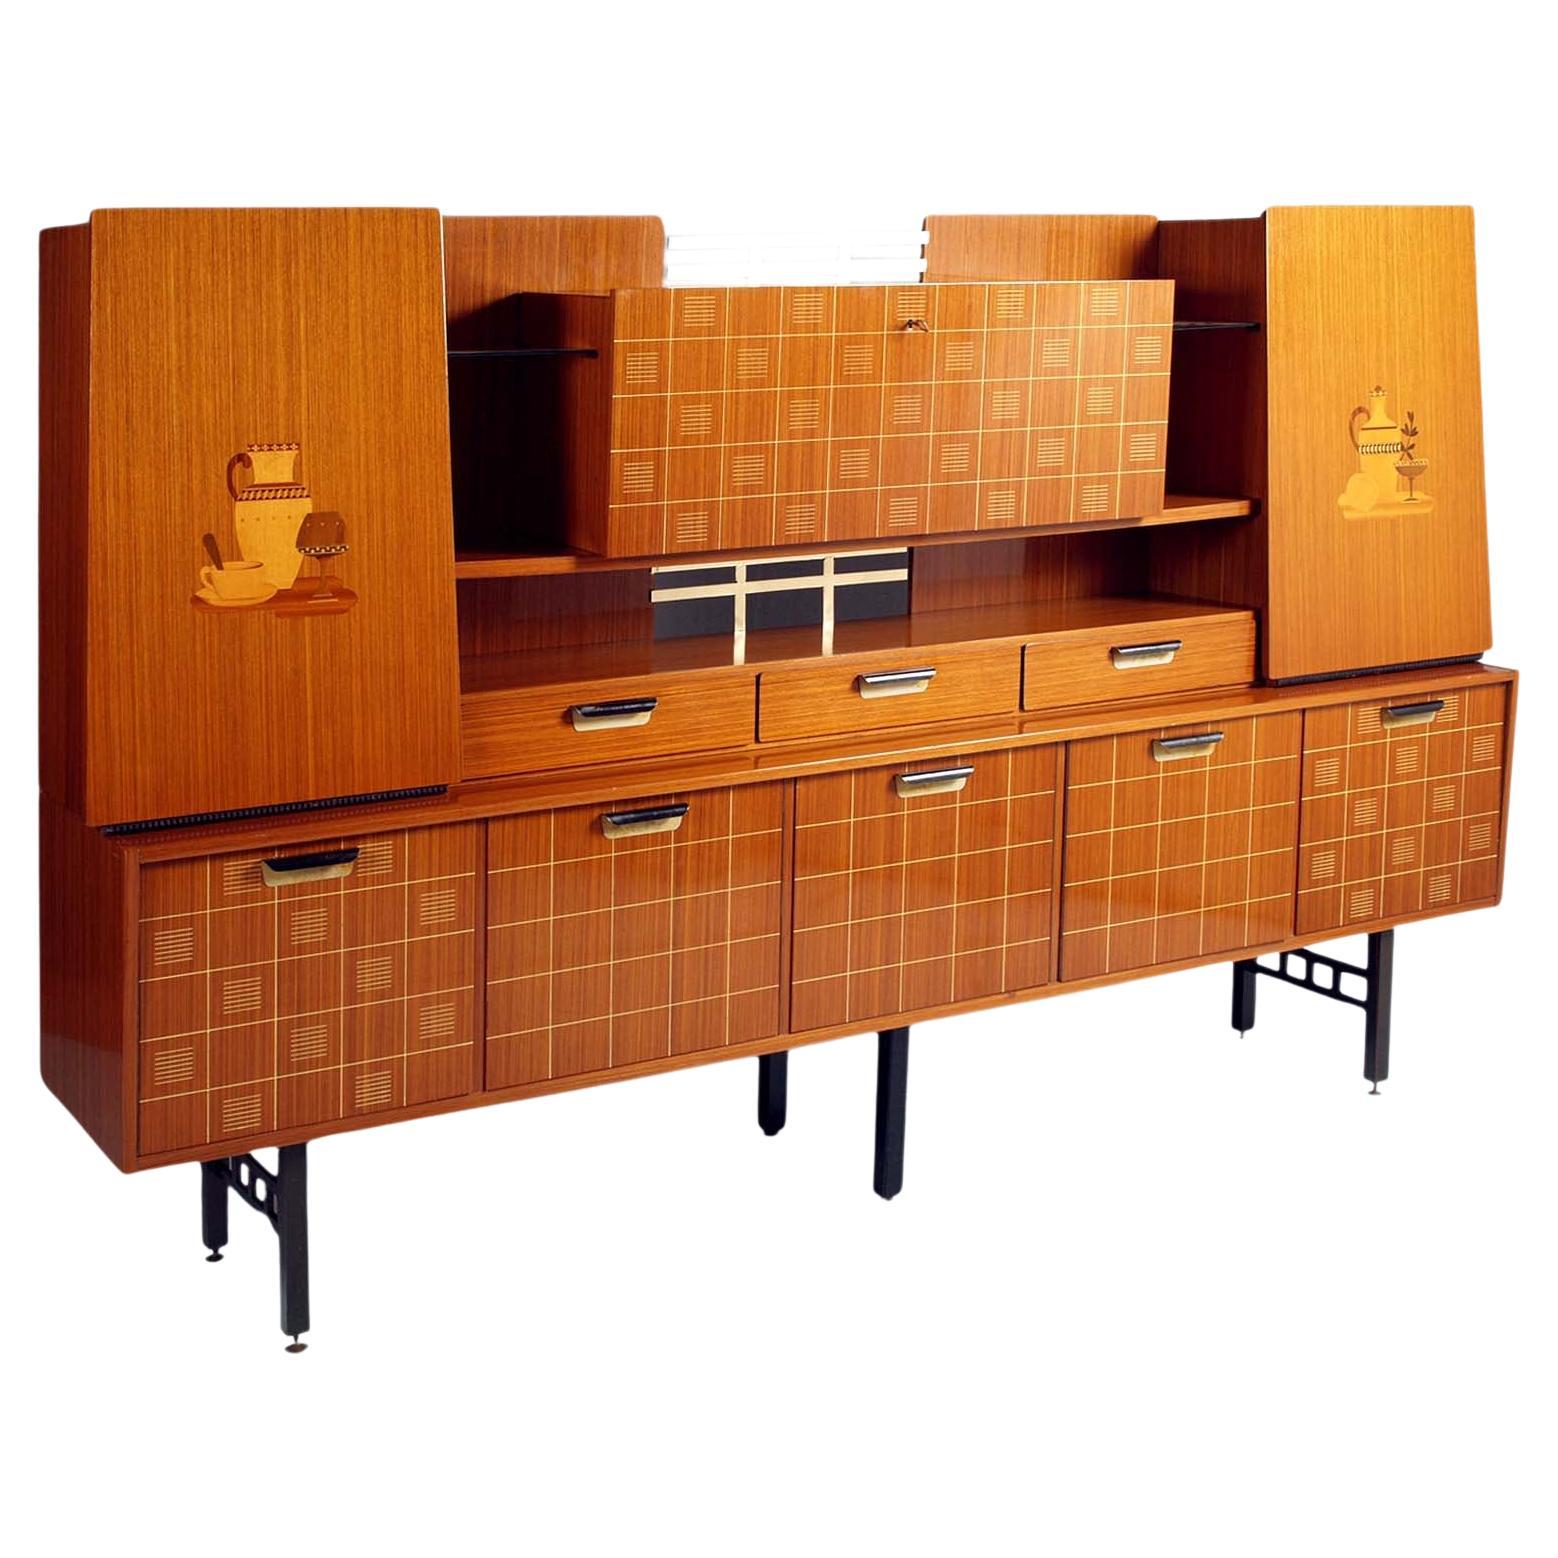 1960s Sideboard La Permanente Mobili Cantù in Veneered Rosewood with Maple Inlay For Sale